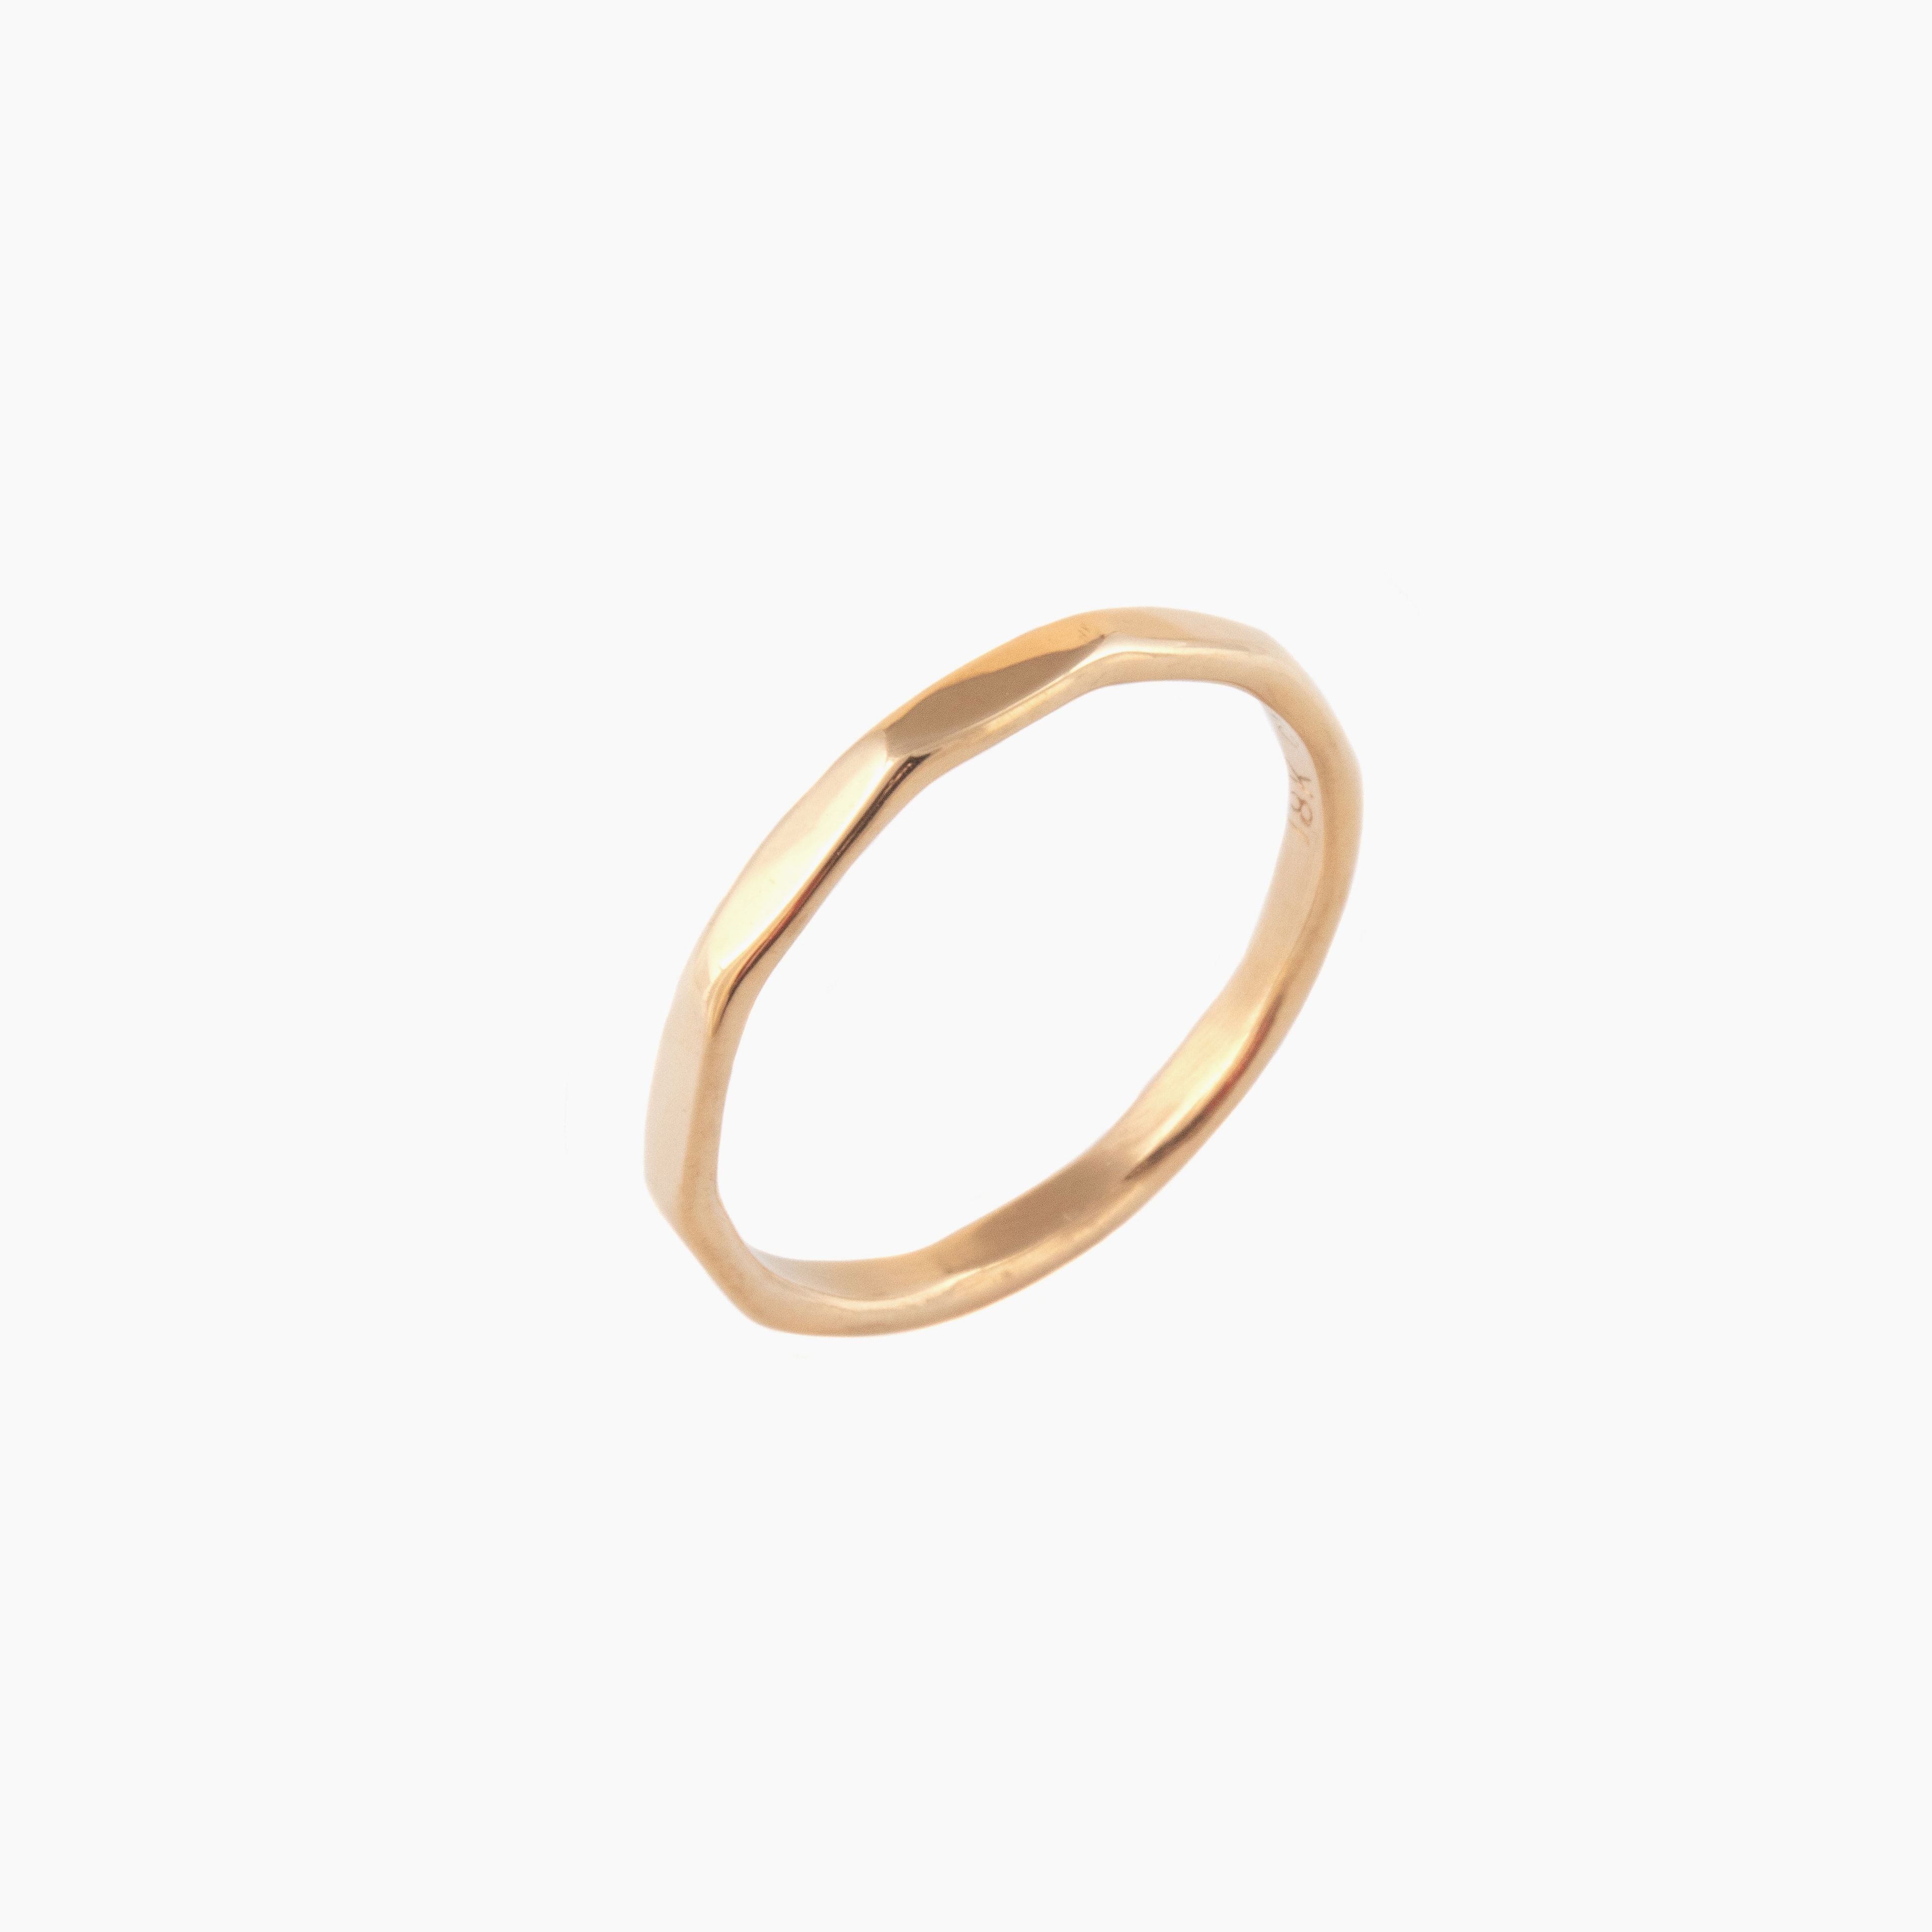 Faceted Wedding Band in 18KY Gold